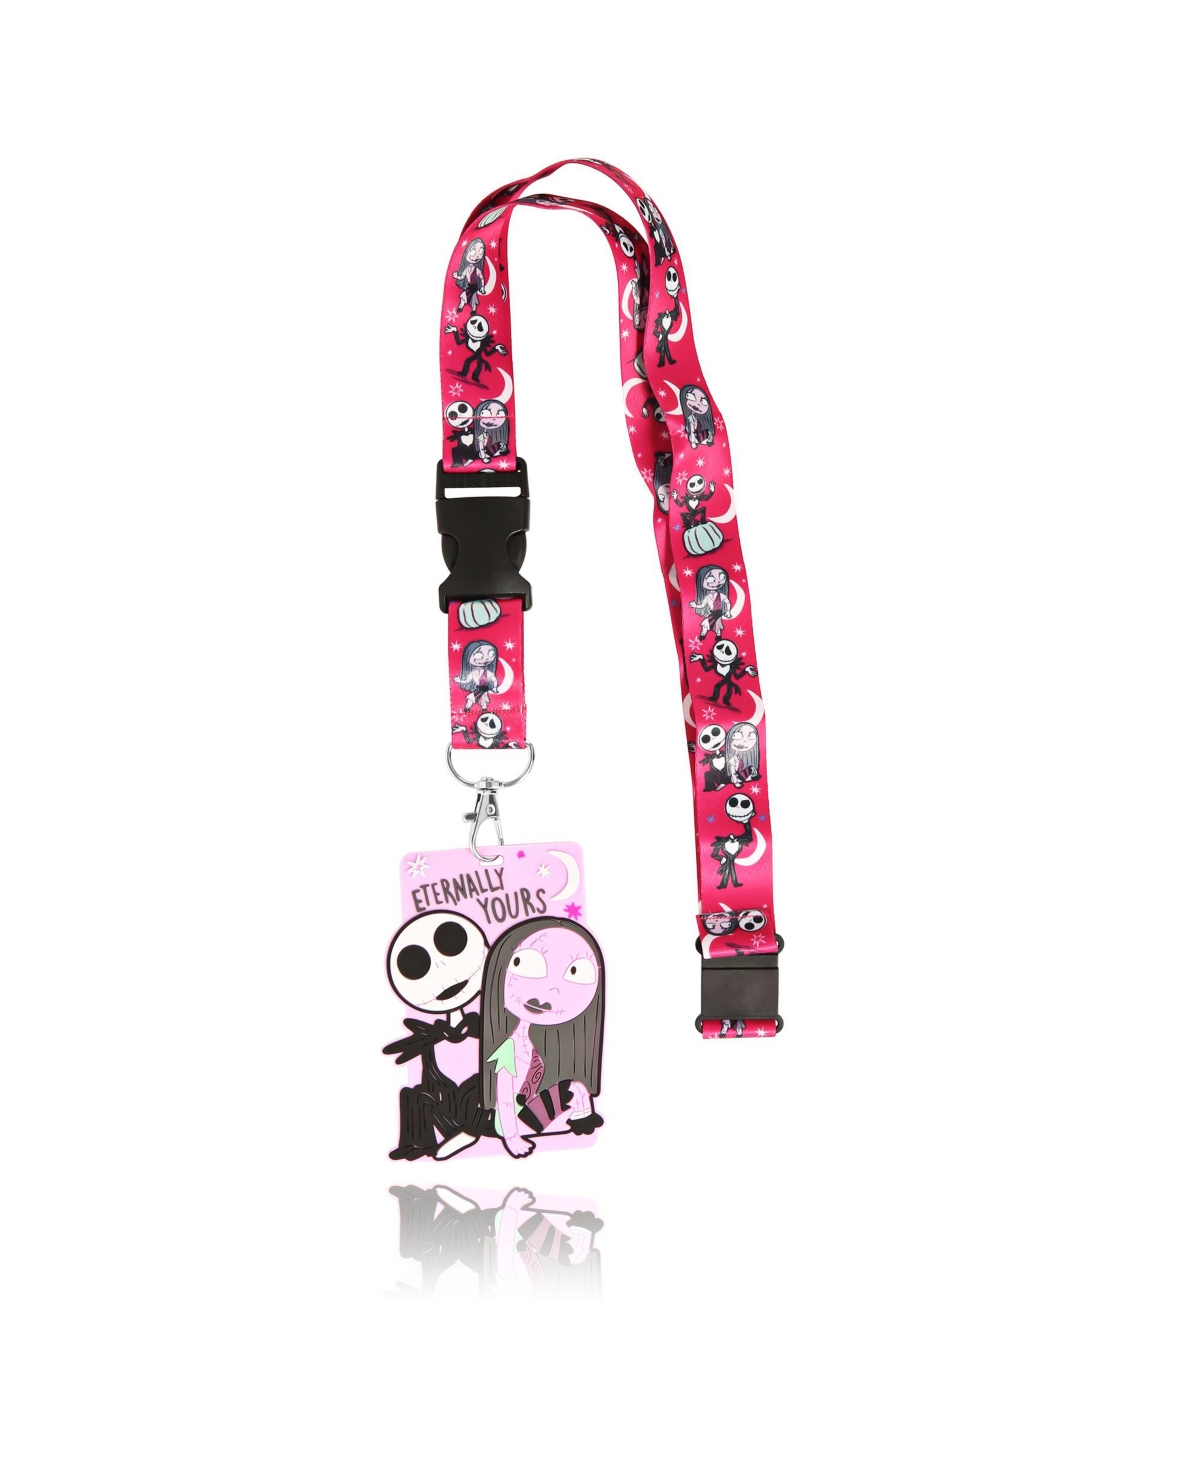 The Nightmare Before Christmas Id Lanyard, Official License Jack and Sally Lanyard, Lanyard with Id Holder - Red, pink, black